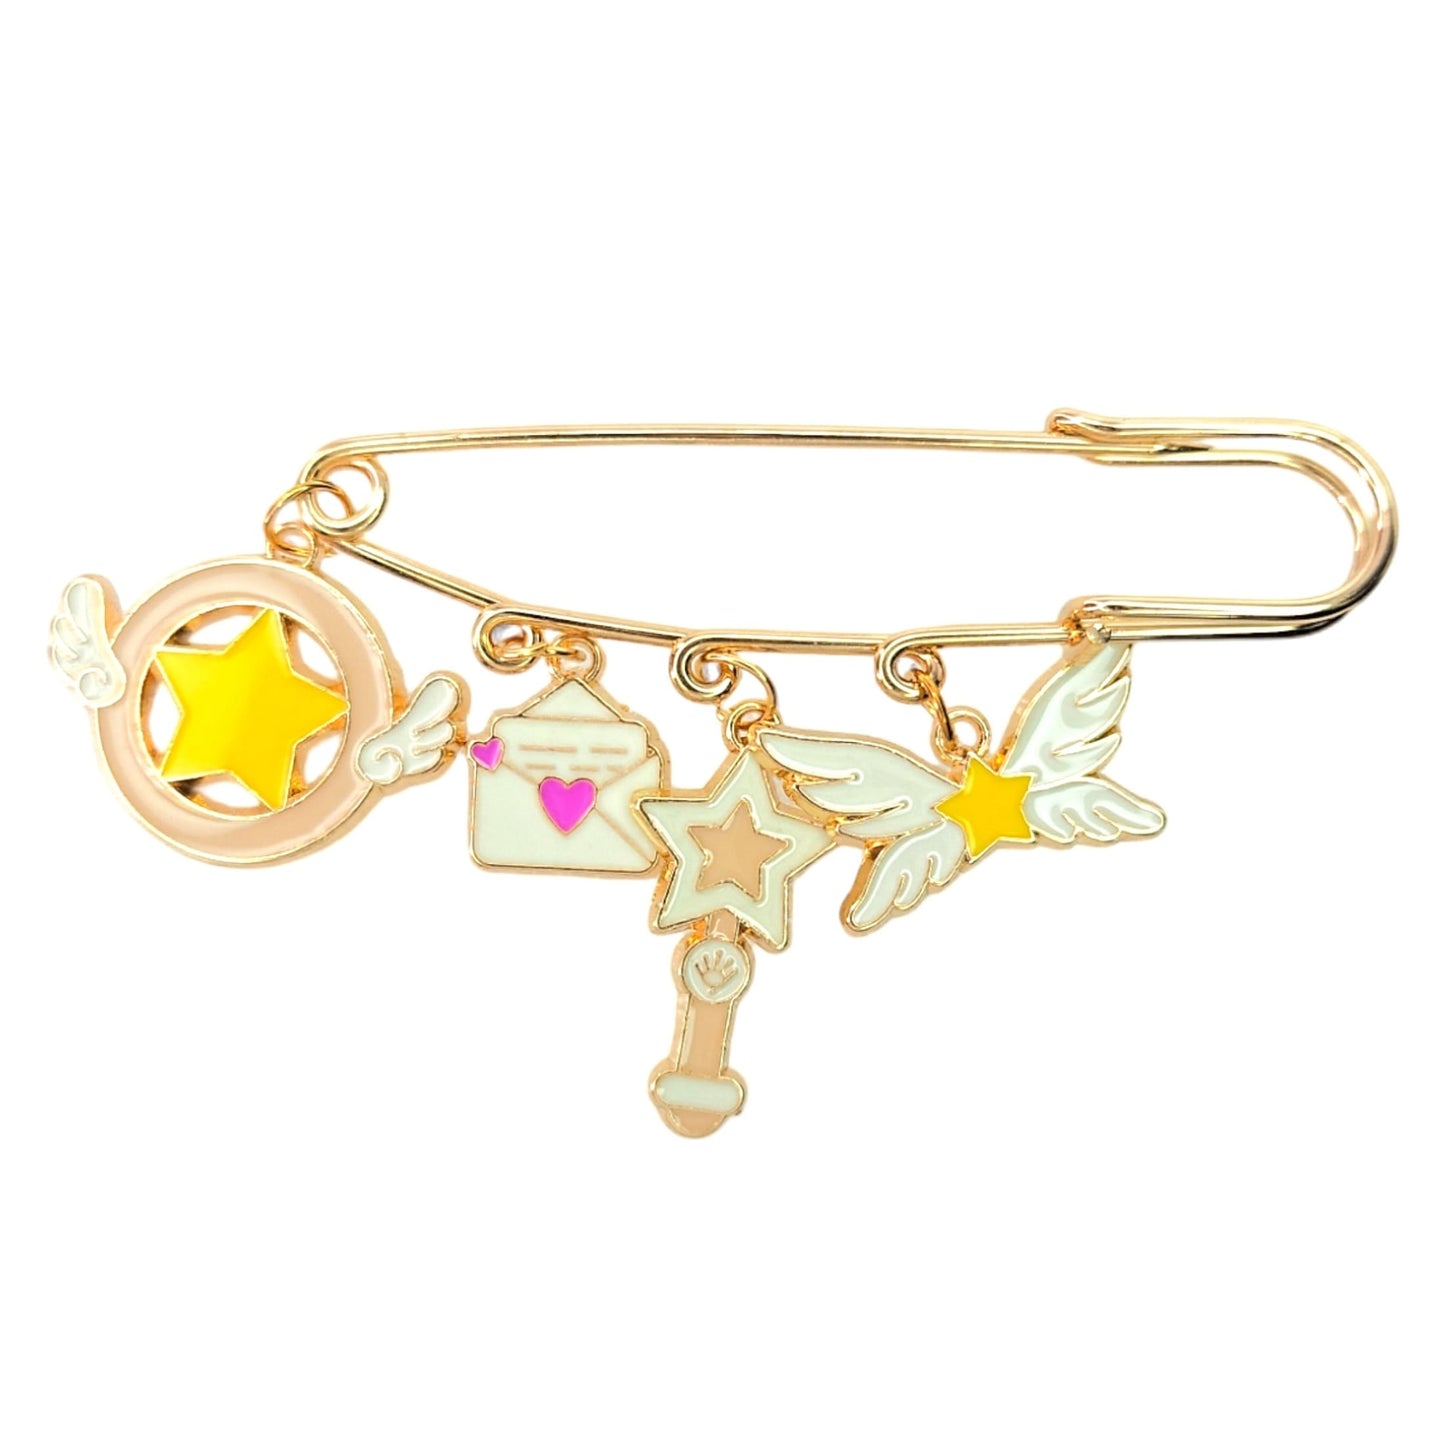 Cardcaptor Sakura Themed Safety Pin from Confetti Kitty, Only 12